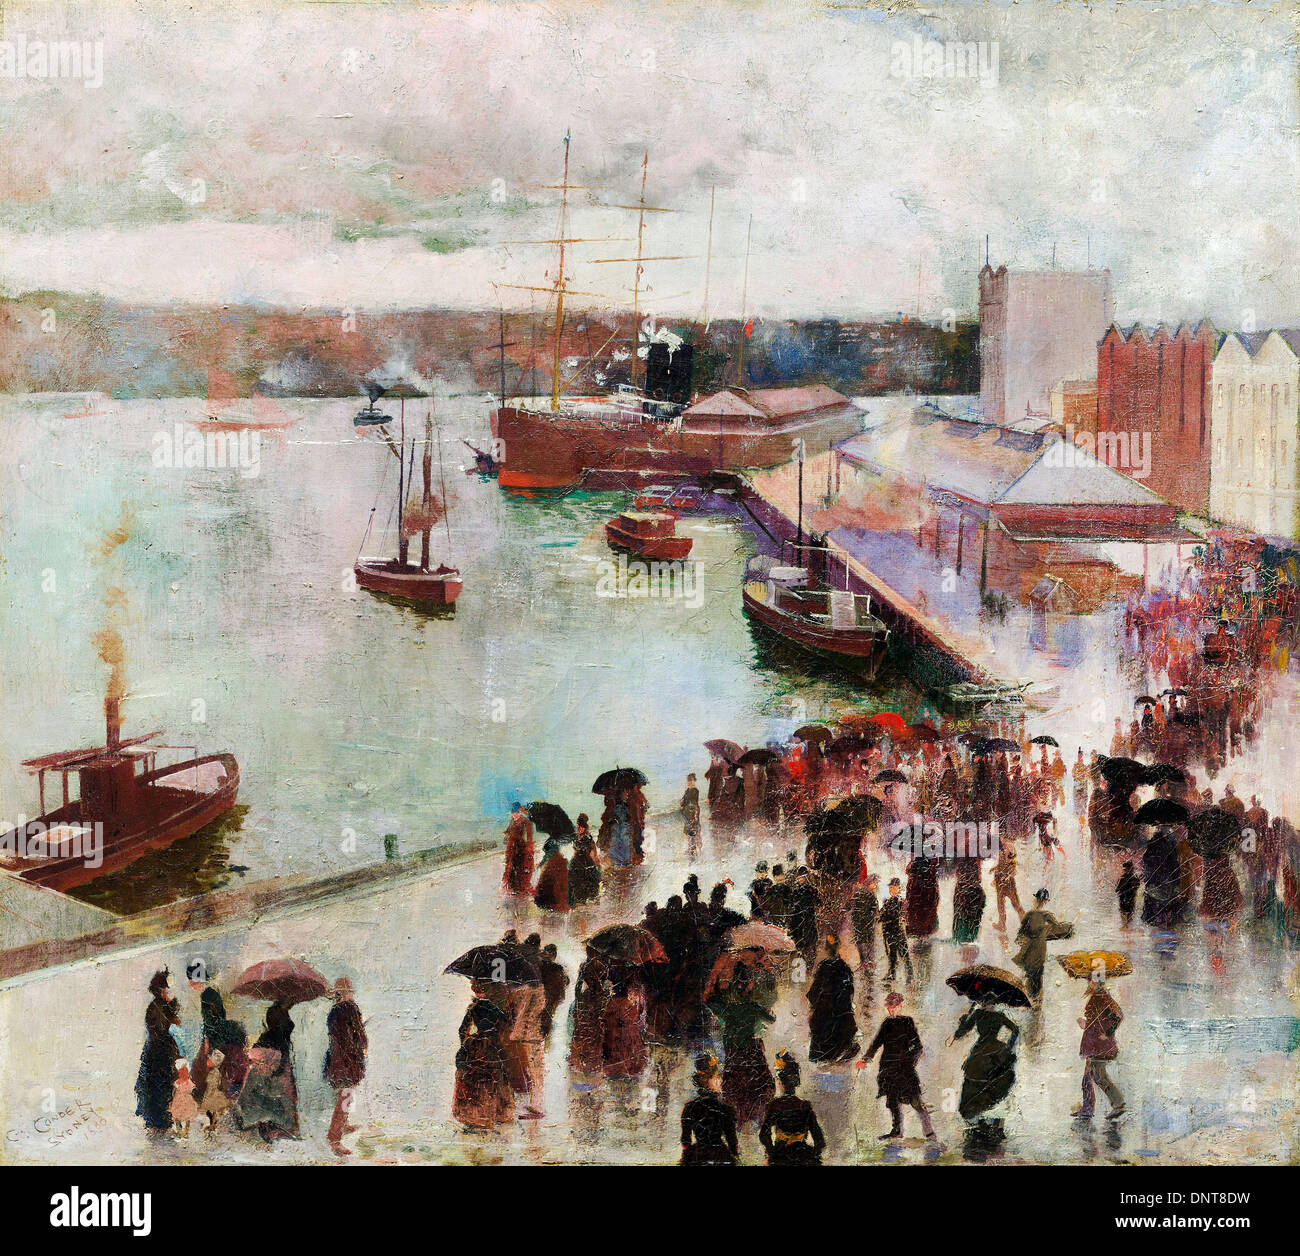 Charles Conder, Departure of the Orient - Circular Quay 1888 Oil on canvas. Art Gallery of New South Wales, Australia. Stock Photo